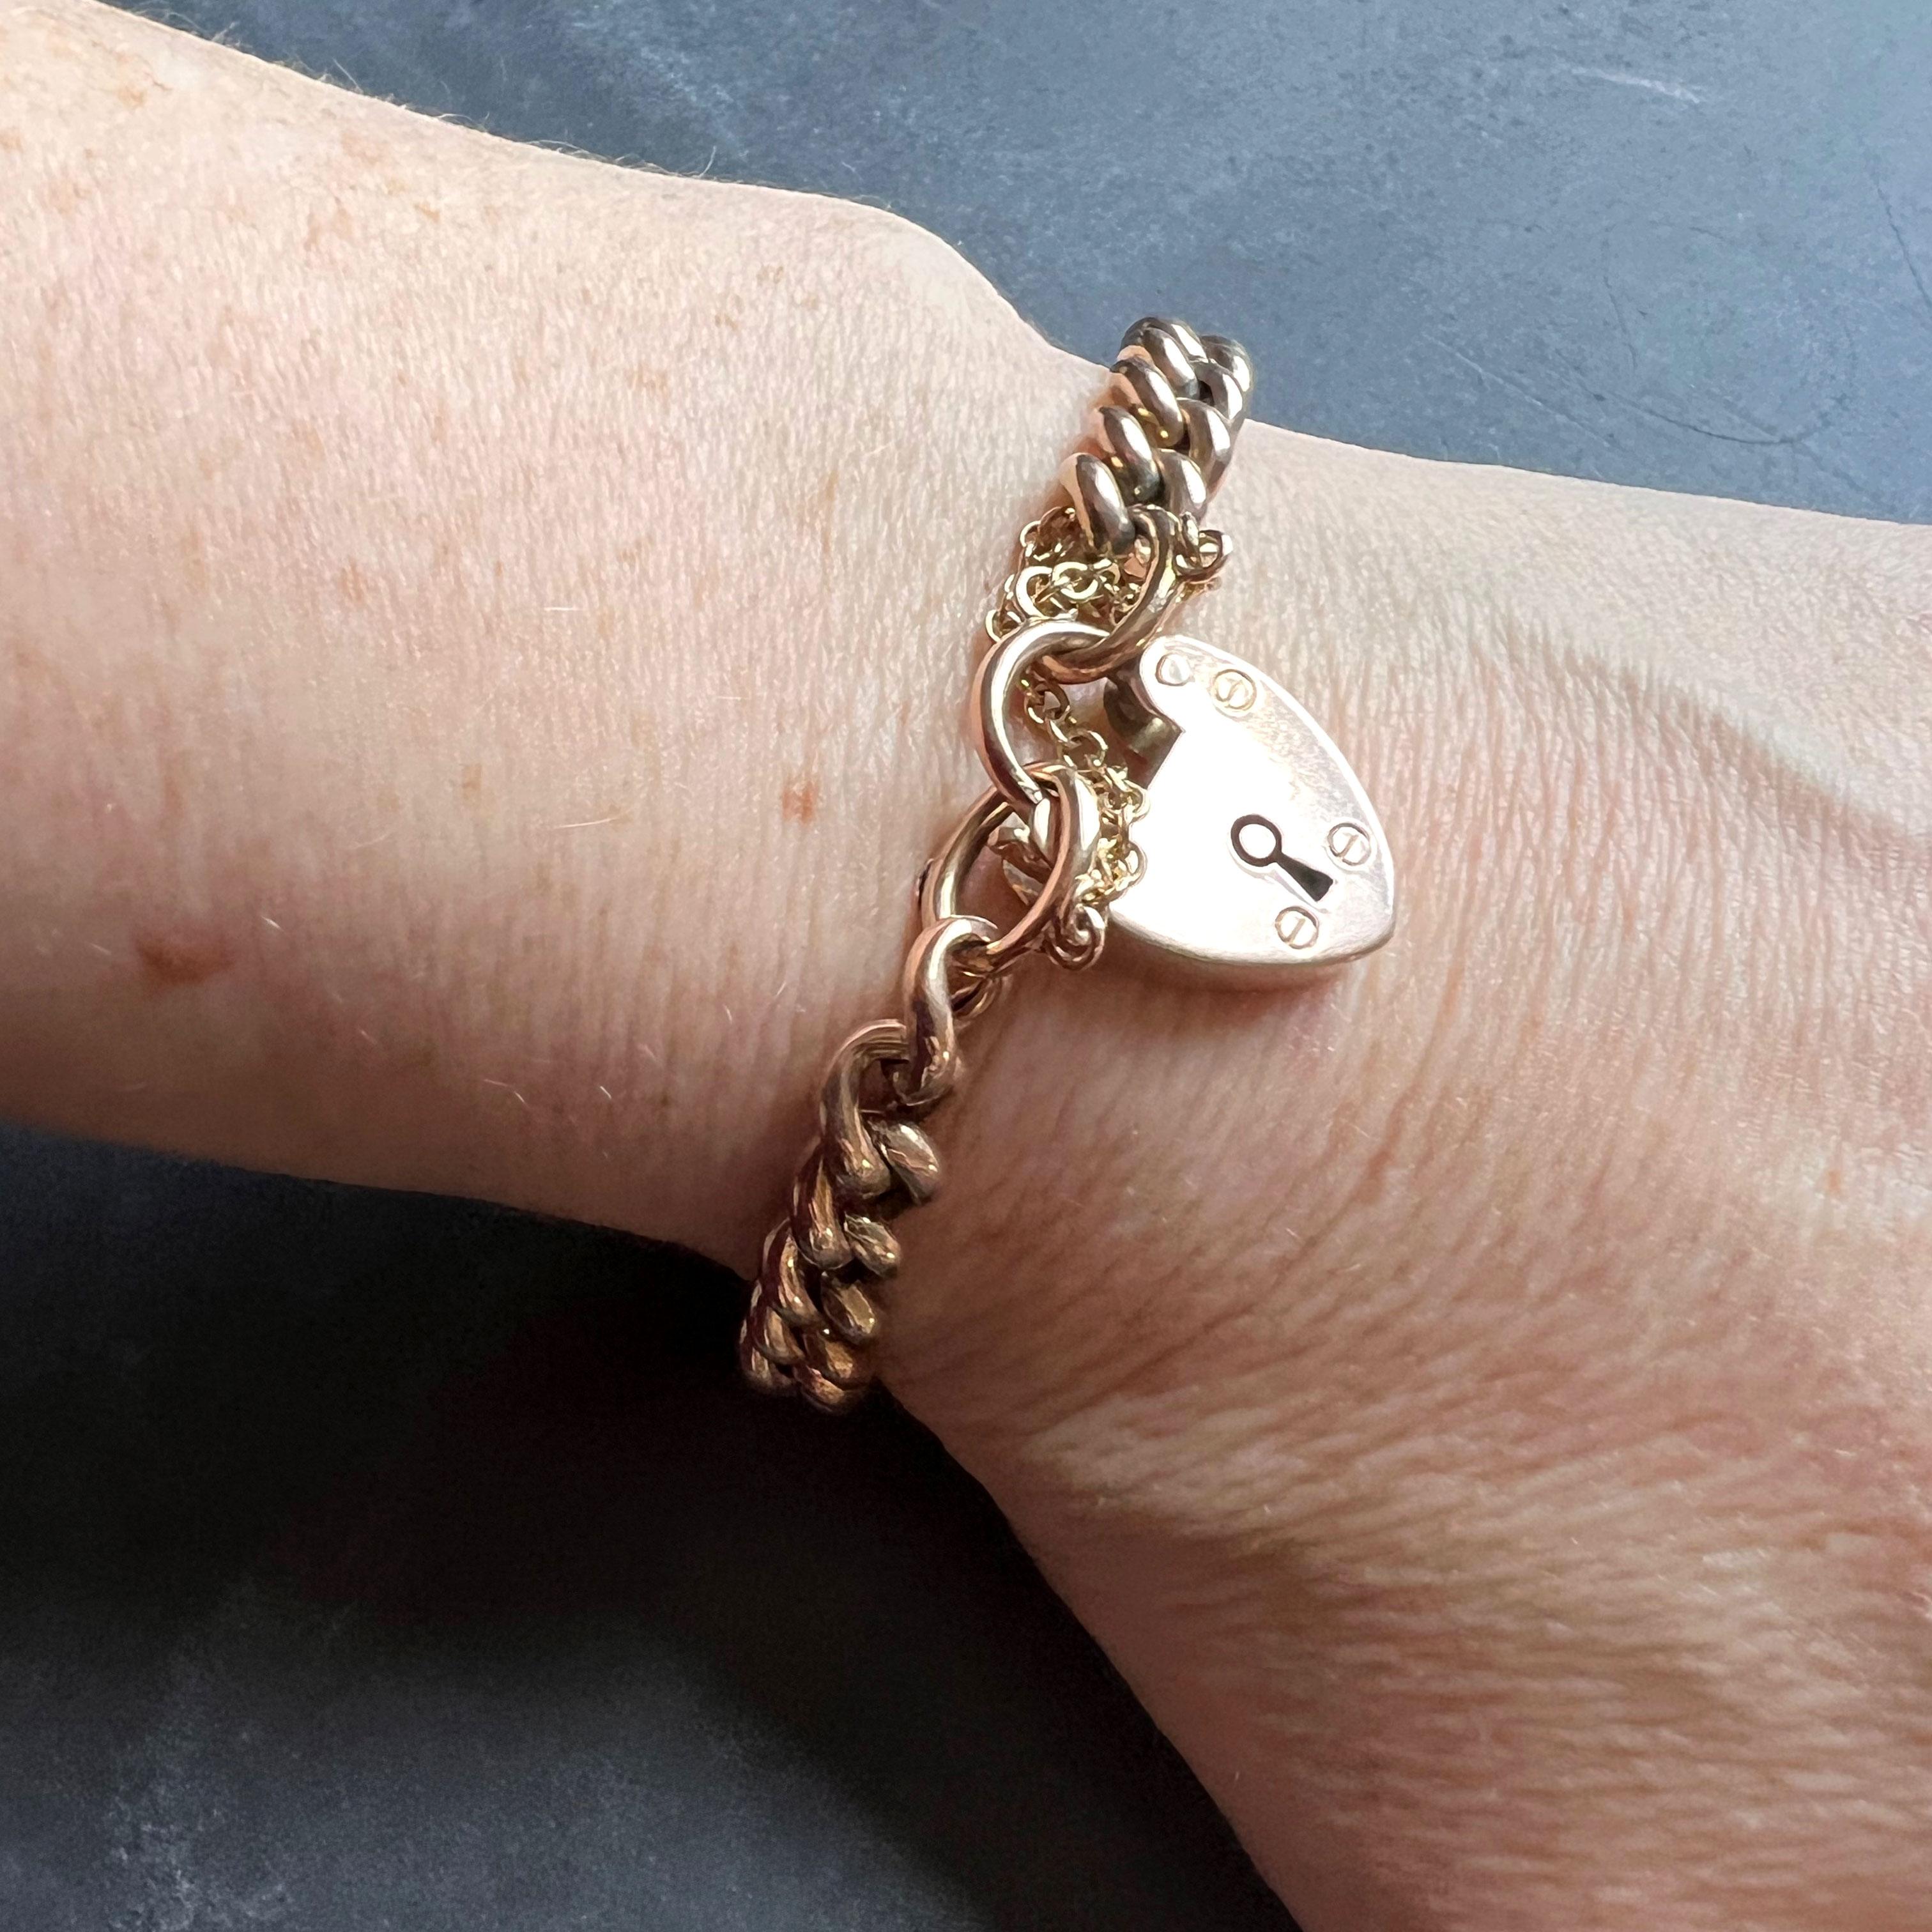 A 9 karat (9K) rose gold curb link bracelet with heart padlock clasp. The bracelet stamped 9C in a cartouche for 9 karat gold, the heart marked for P&M Ltd (unknown makers), Birmingham, 9 karat gold. 7” long.

Dimensions: 18 x 0.7 x 0.3cm
Heart